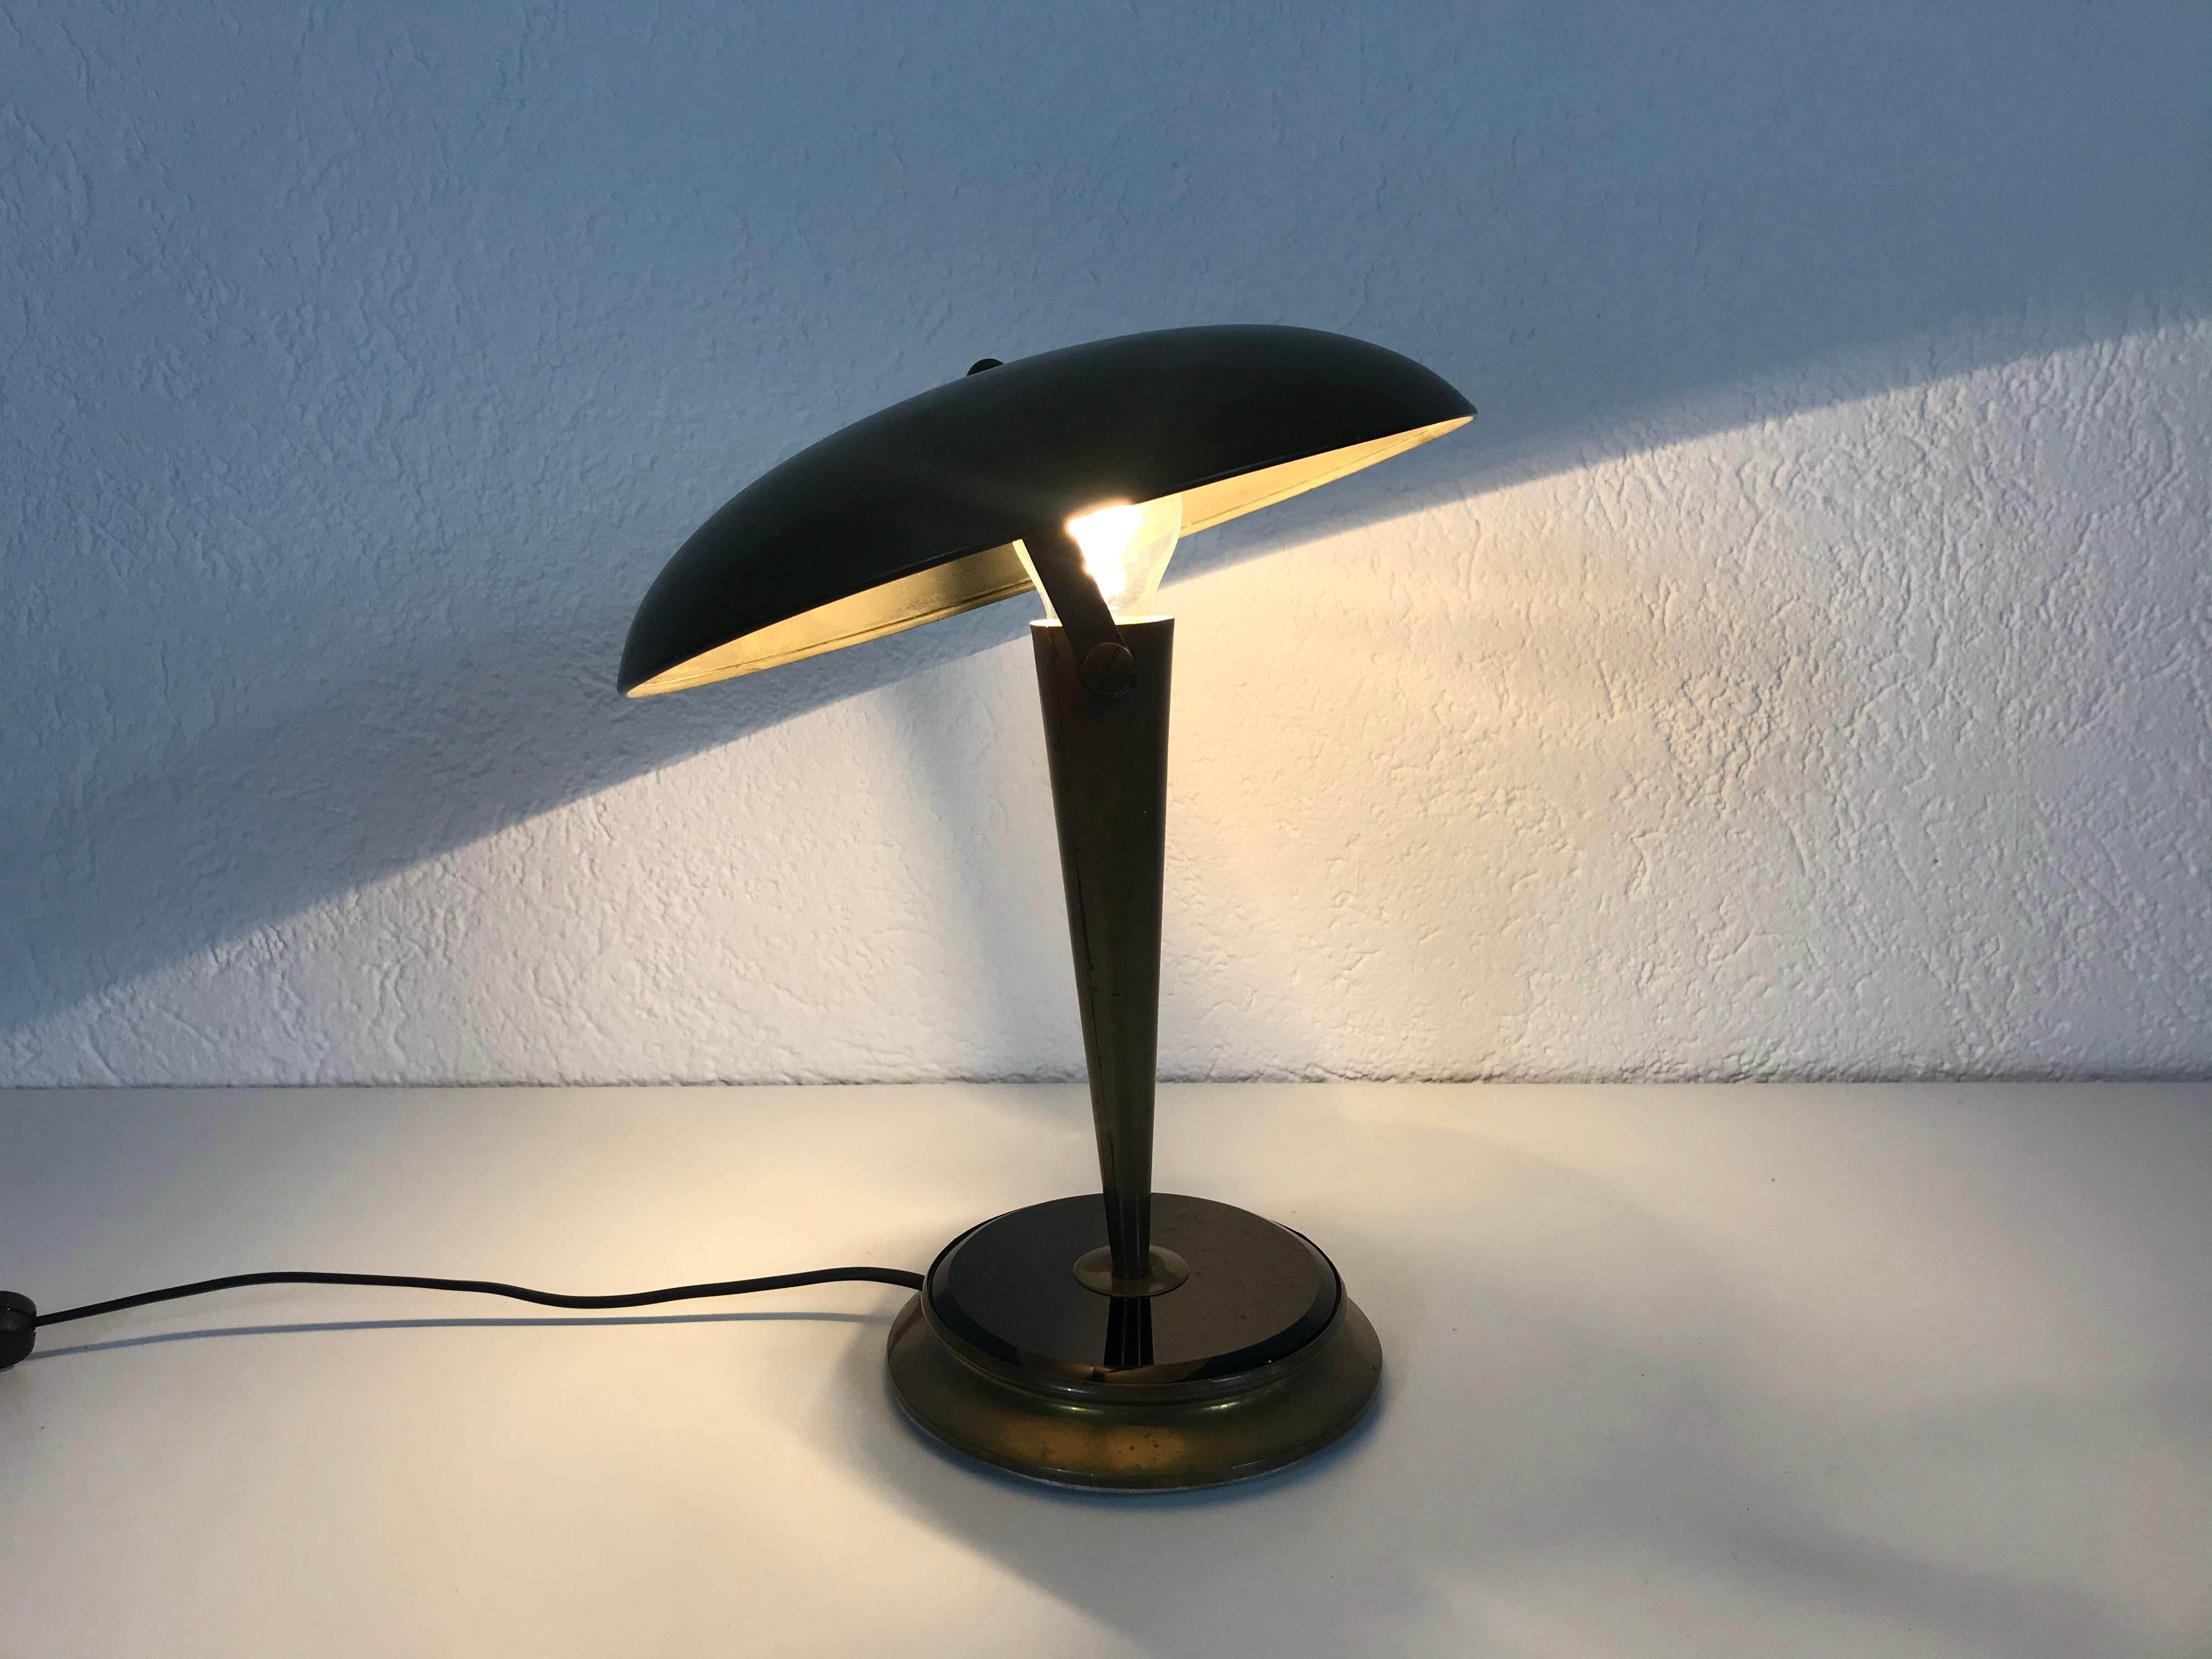 An Italian table lamp made in the 1960s.

The light requires one E27 light bulb.